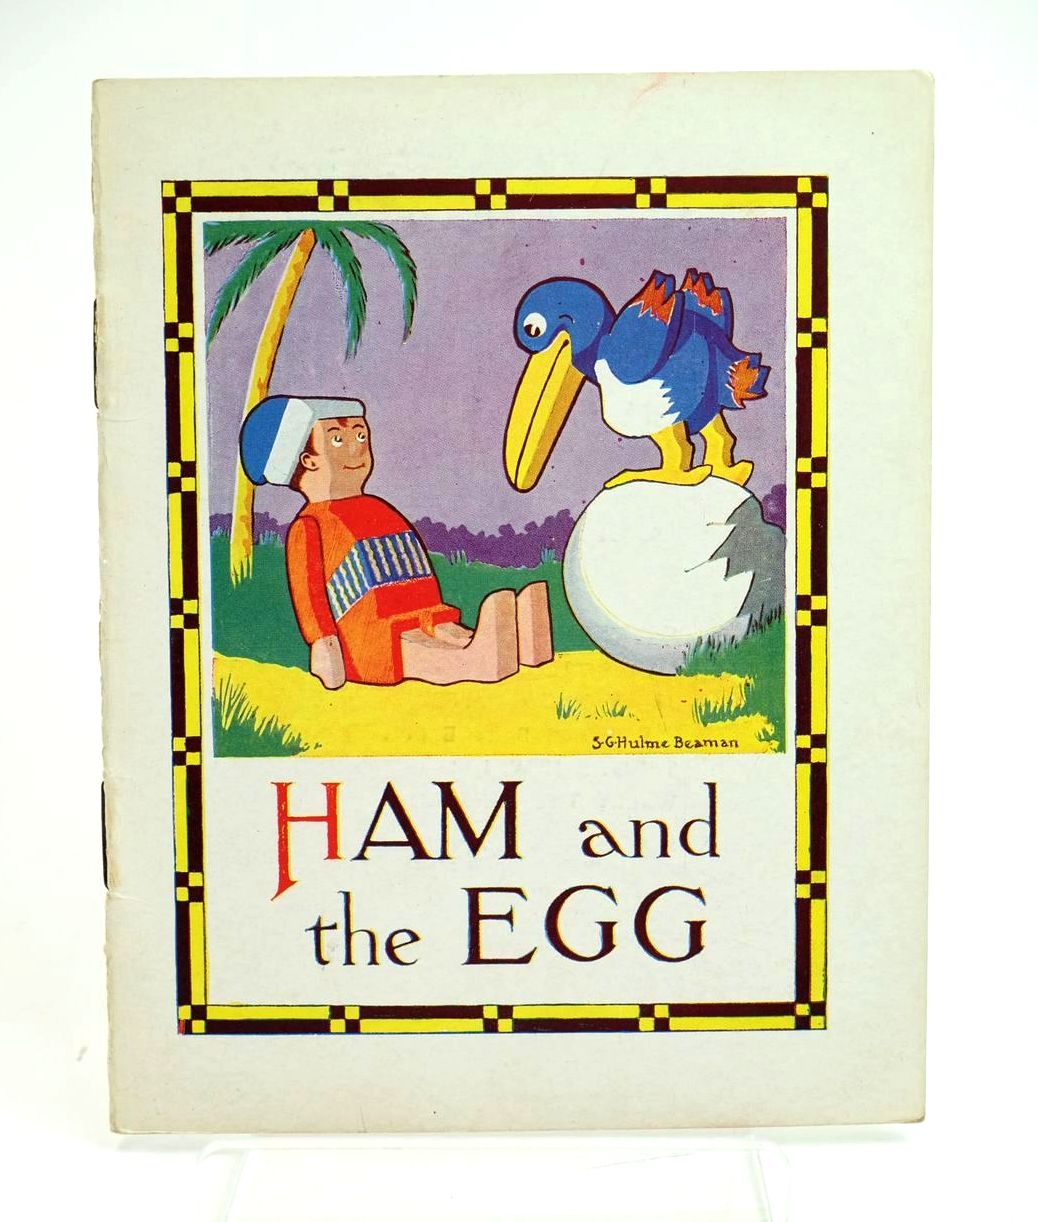 Photo of HAM AND EGG written by Beaman, S.G. Hulme illustrated by Beaman, S.G. Hulme published by Frederick Warne &amp; Co Ltd. (STOCK CODE: 1319173)  for sale by Stella & Rose's Books